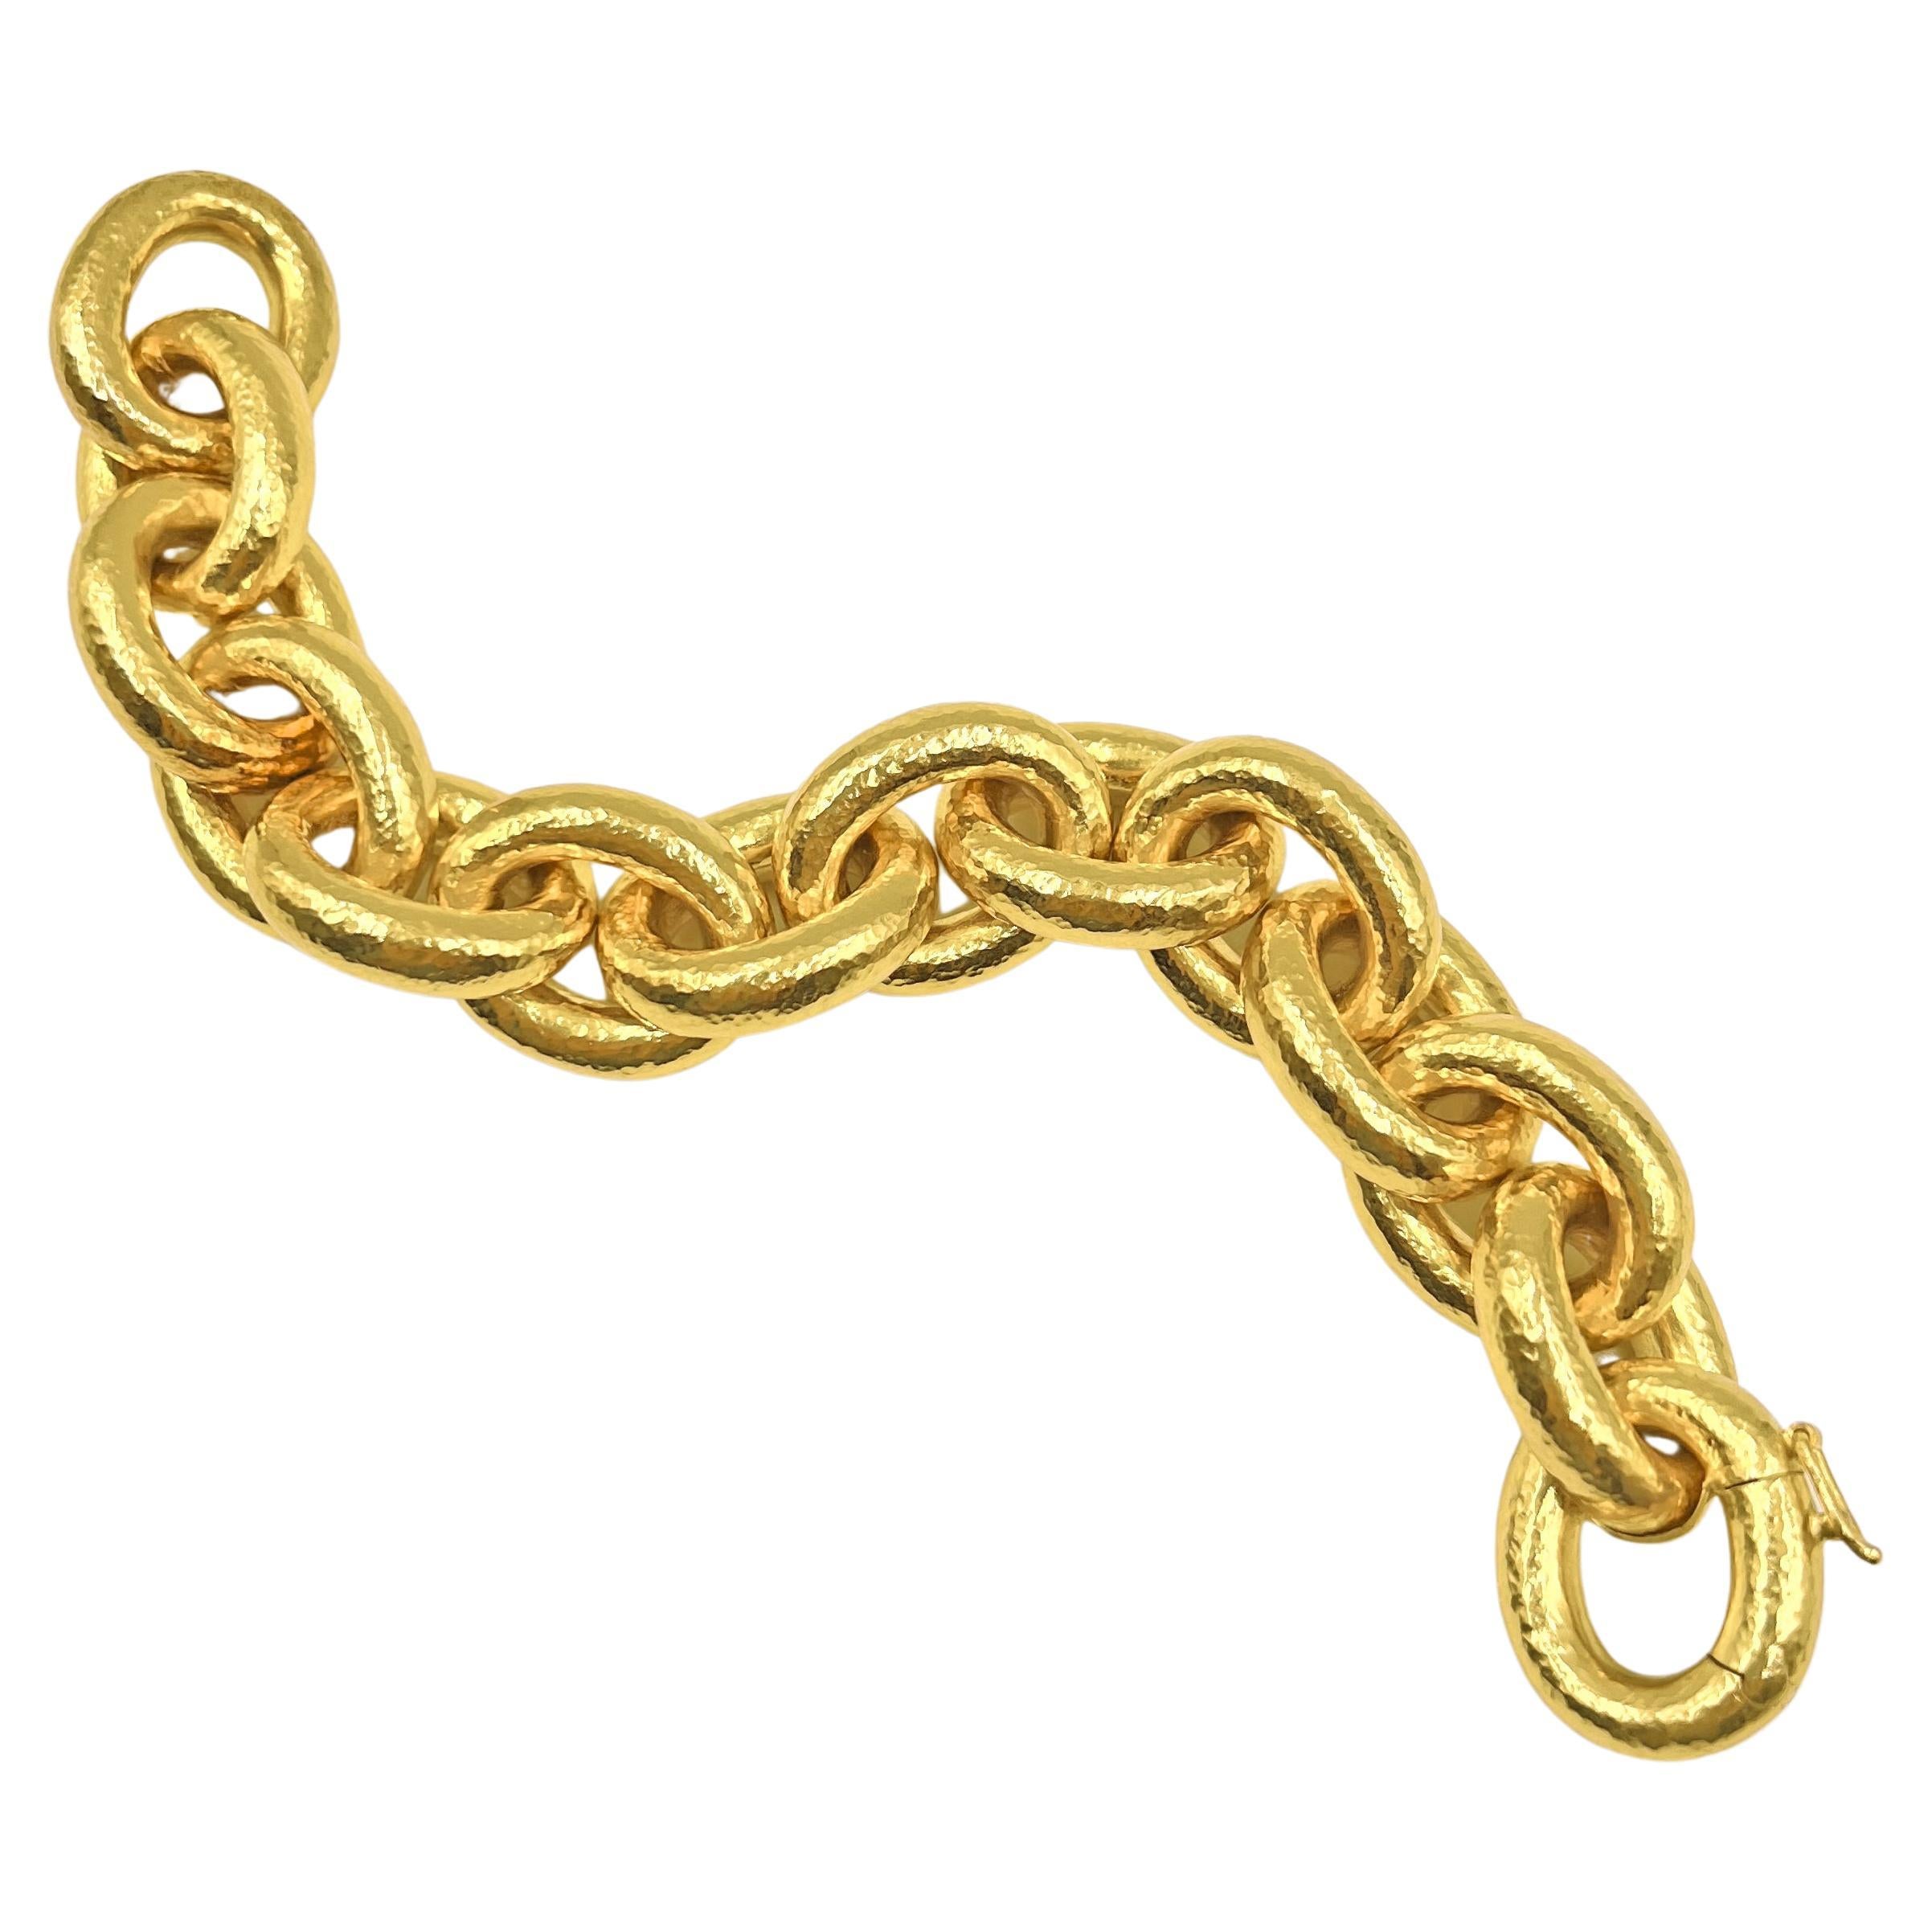 Stunning 19k yellow gold curb link bracelet by Elizabeth Locke.  Inspired by an antique Mediterranean design, the elegant oval curb links on this bracelet consist of fourteen oval links with a polished and gently hammered finish.  The innovative